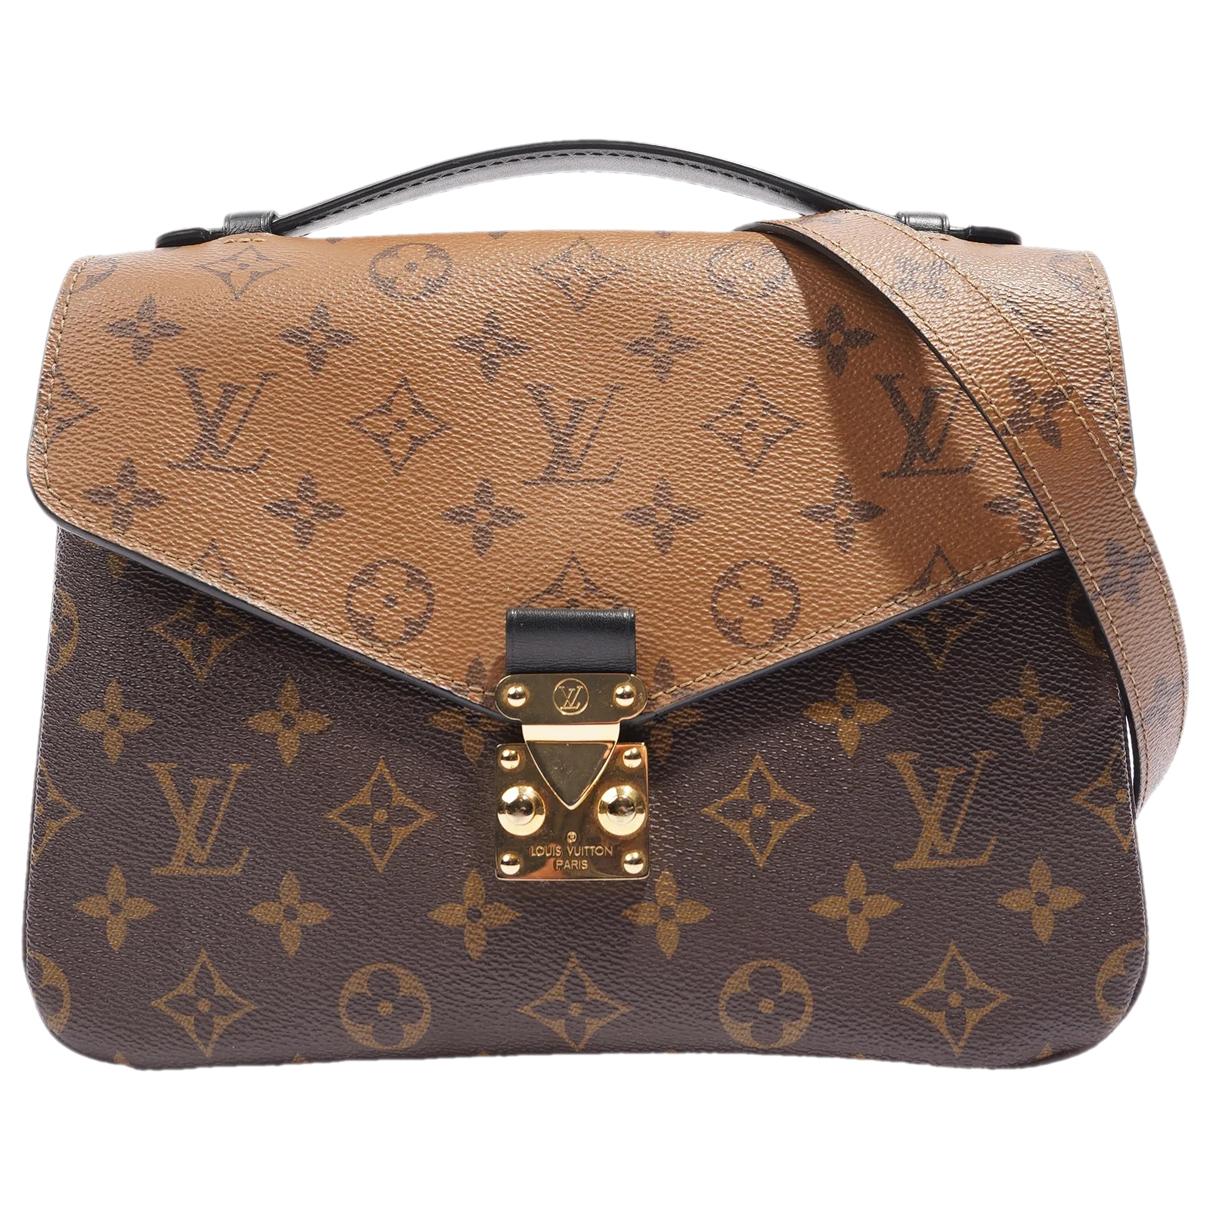 Victoire leather handbag Louis Vuitton Brown in Leather - 36614582